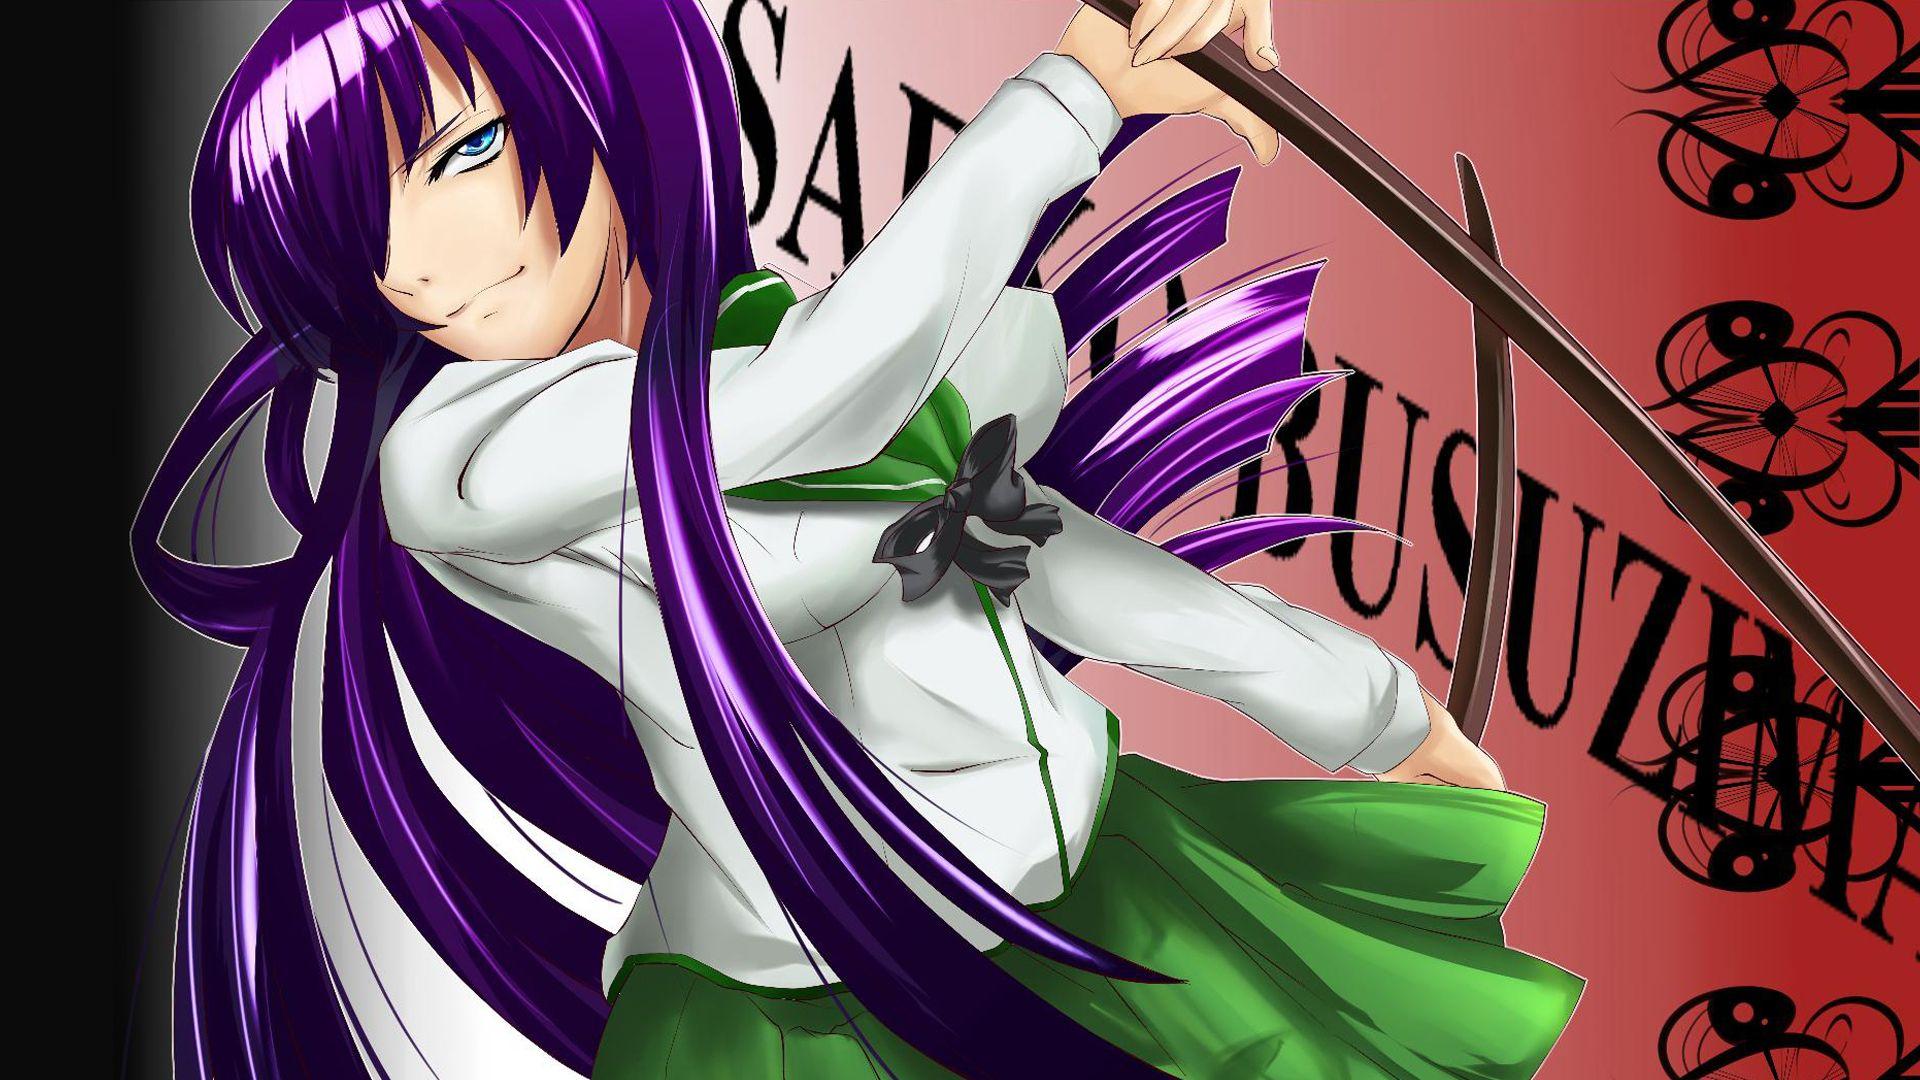 Highschool of the Dead. Free Anime Wallpaper Site